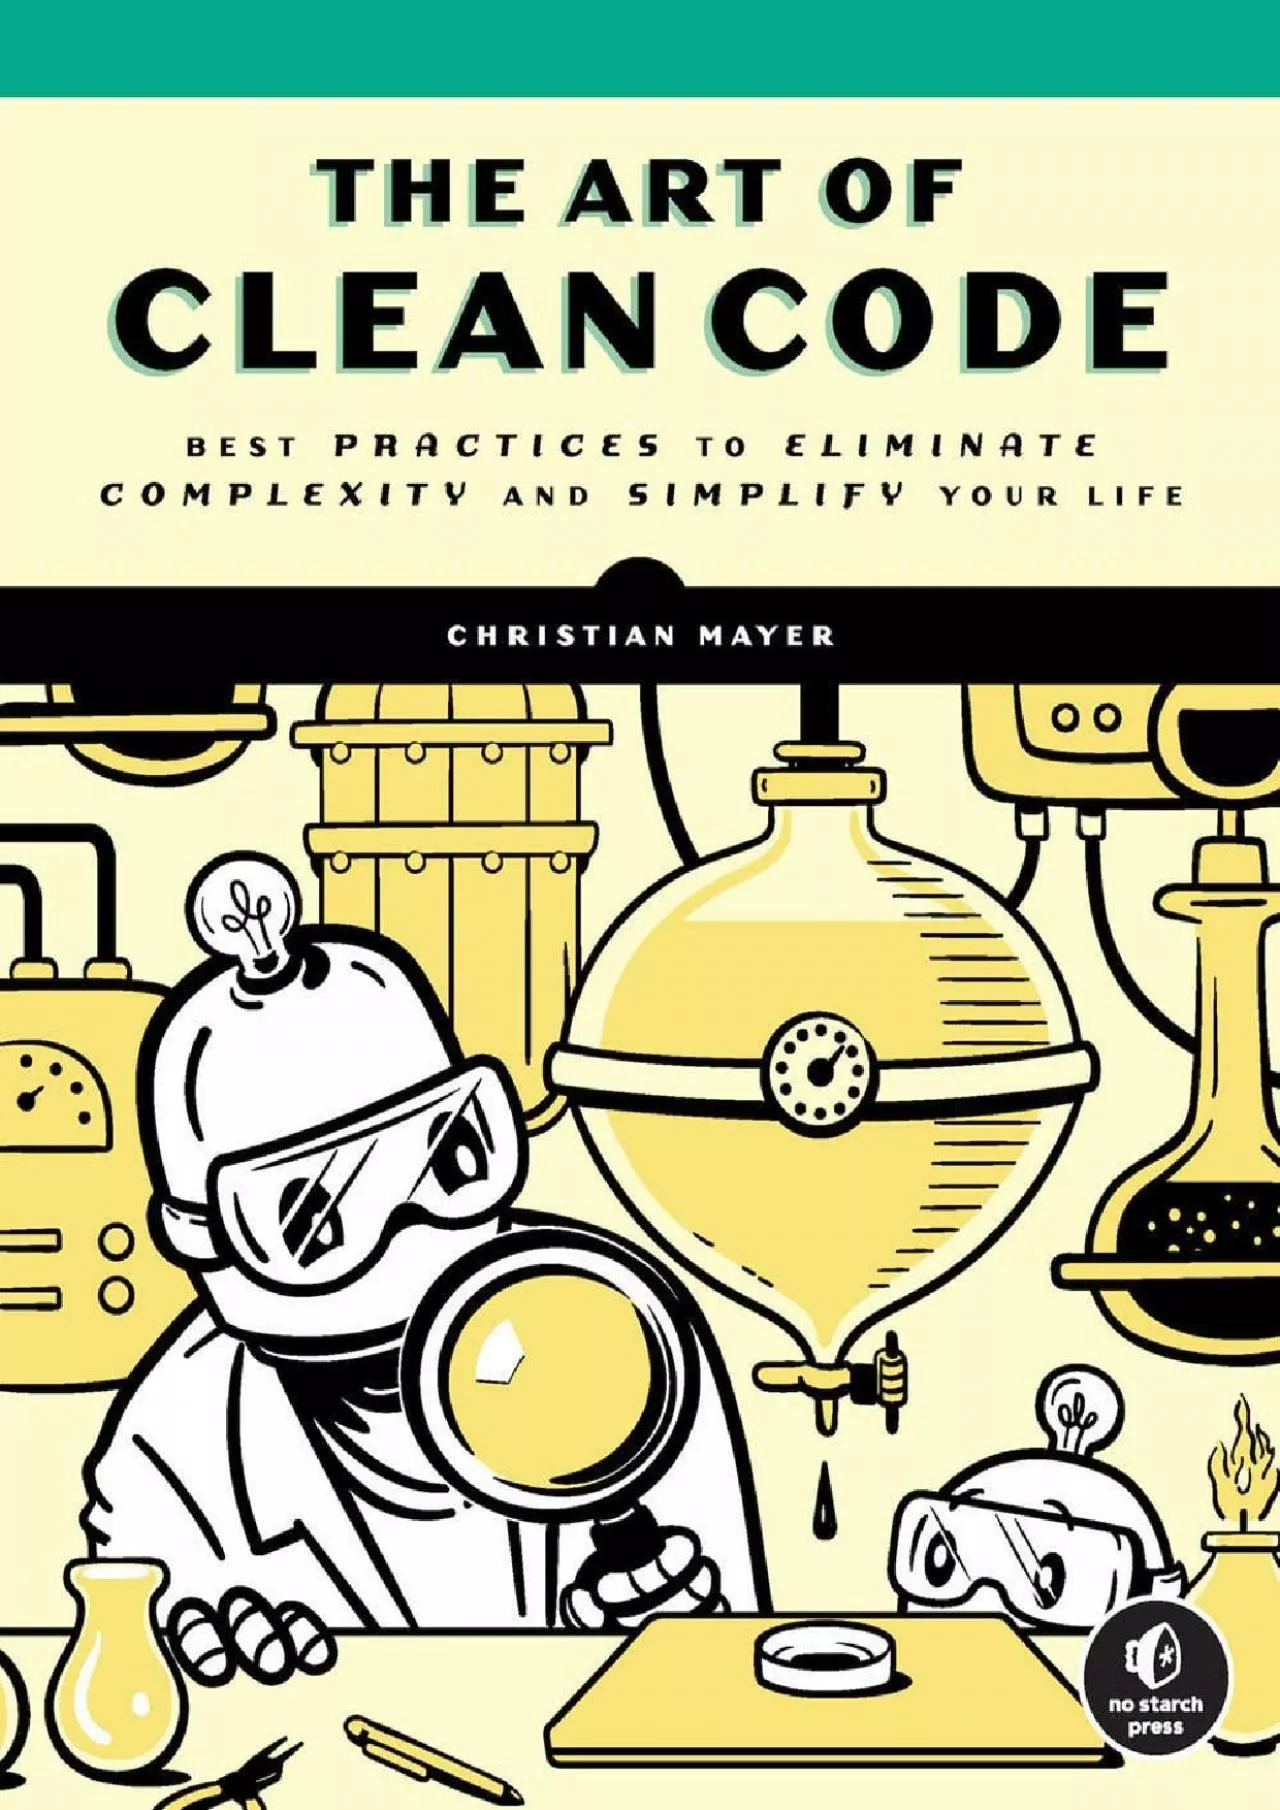 [FREE]-The Art of Clean Code Best Practices to Eliminate Complexity and Simplify Your